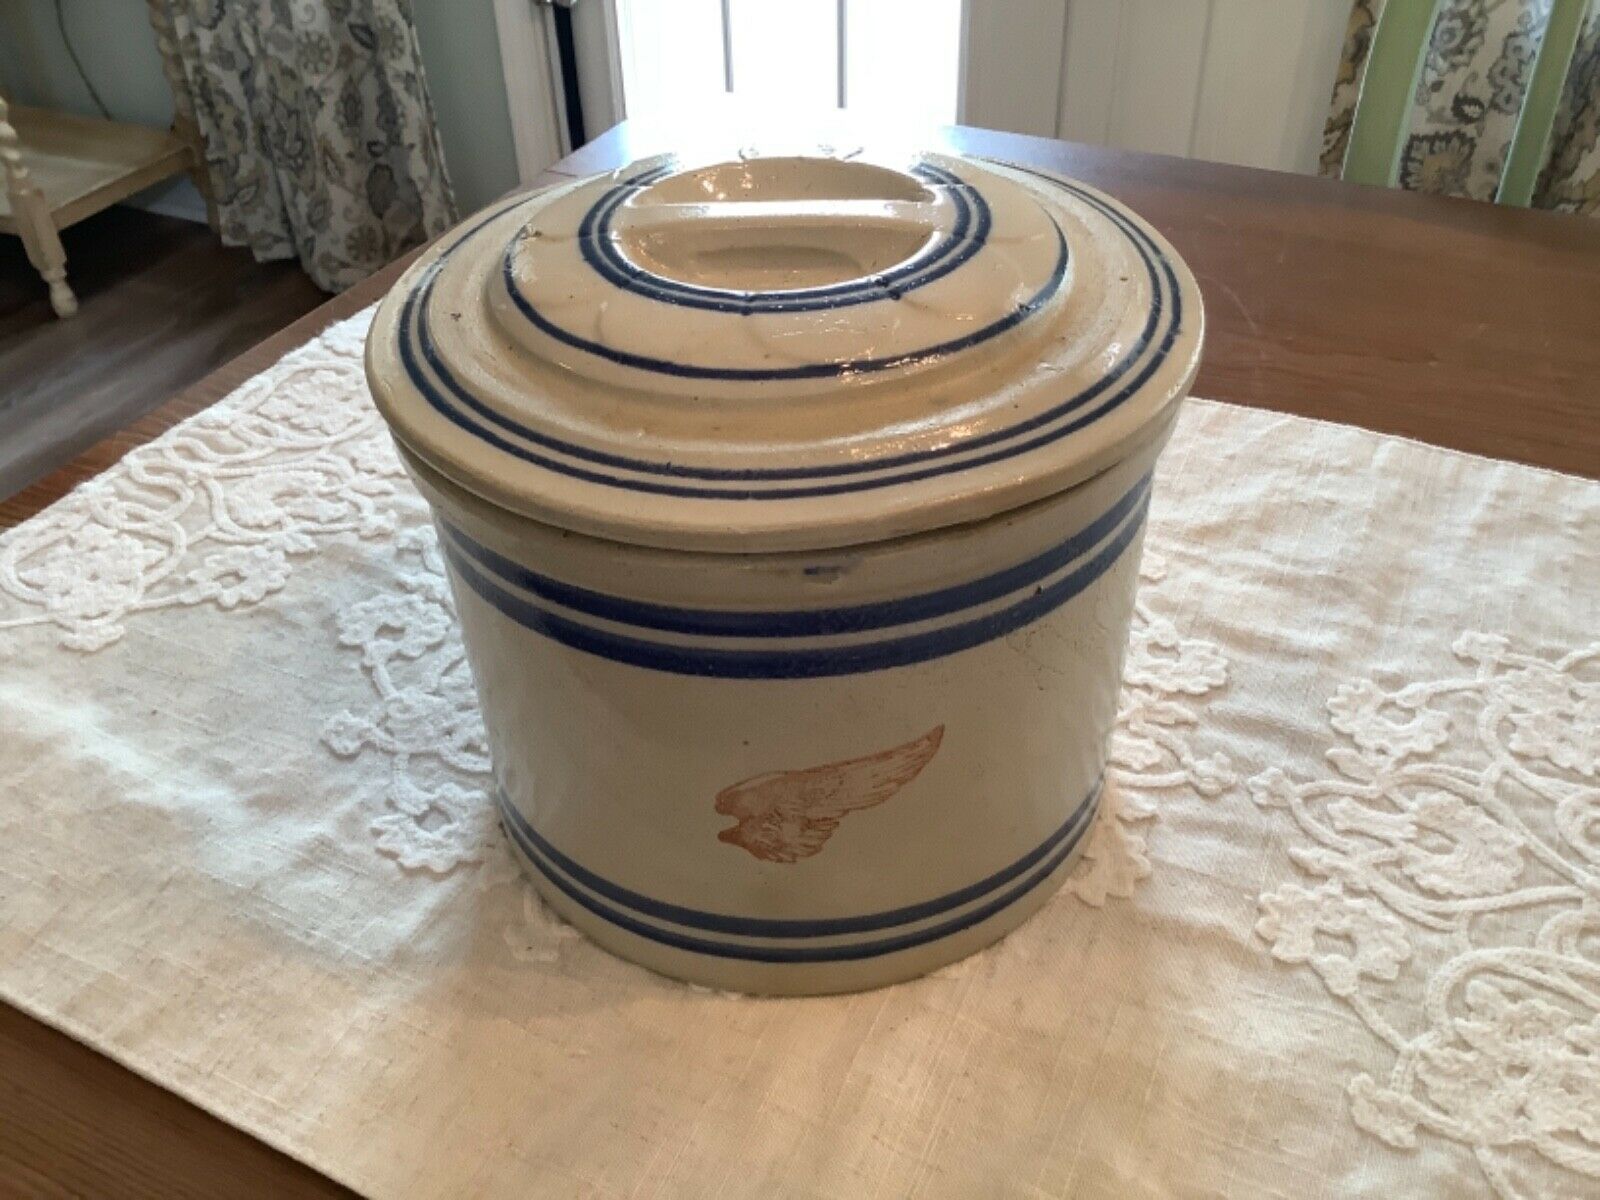 Rare Red Wing Crock Blue Bands With Daisy Lid  Crock Is 5.25 X 7